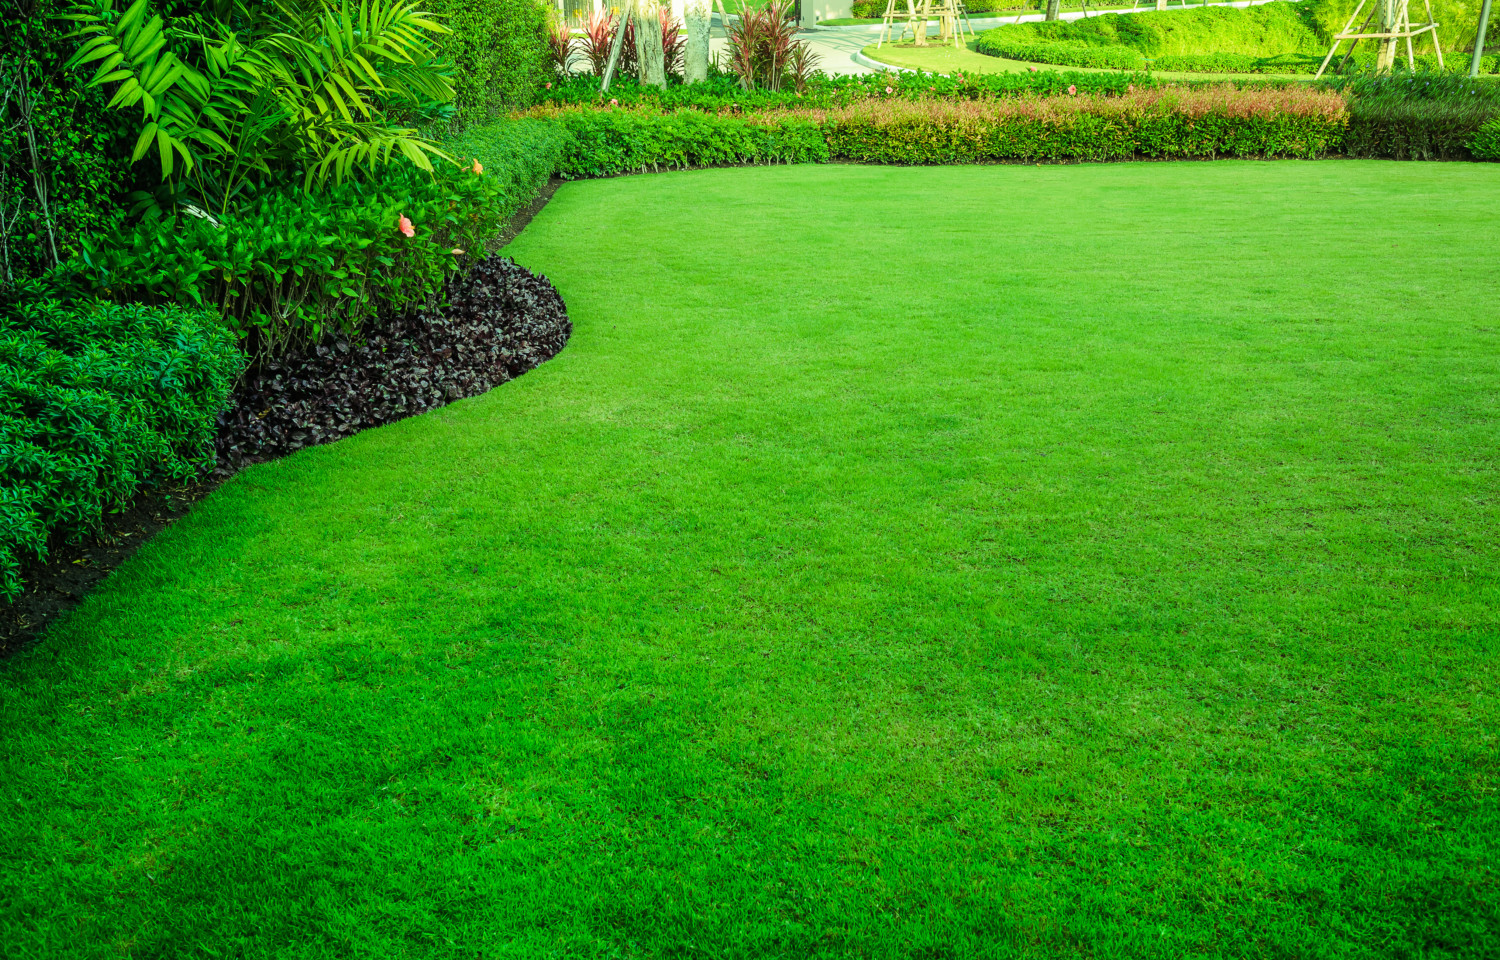 How To Make Grass Green How To Make Grass Green And Lush - Simplemost